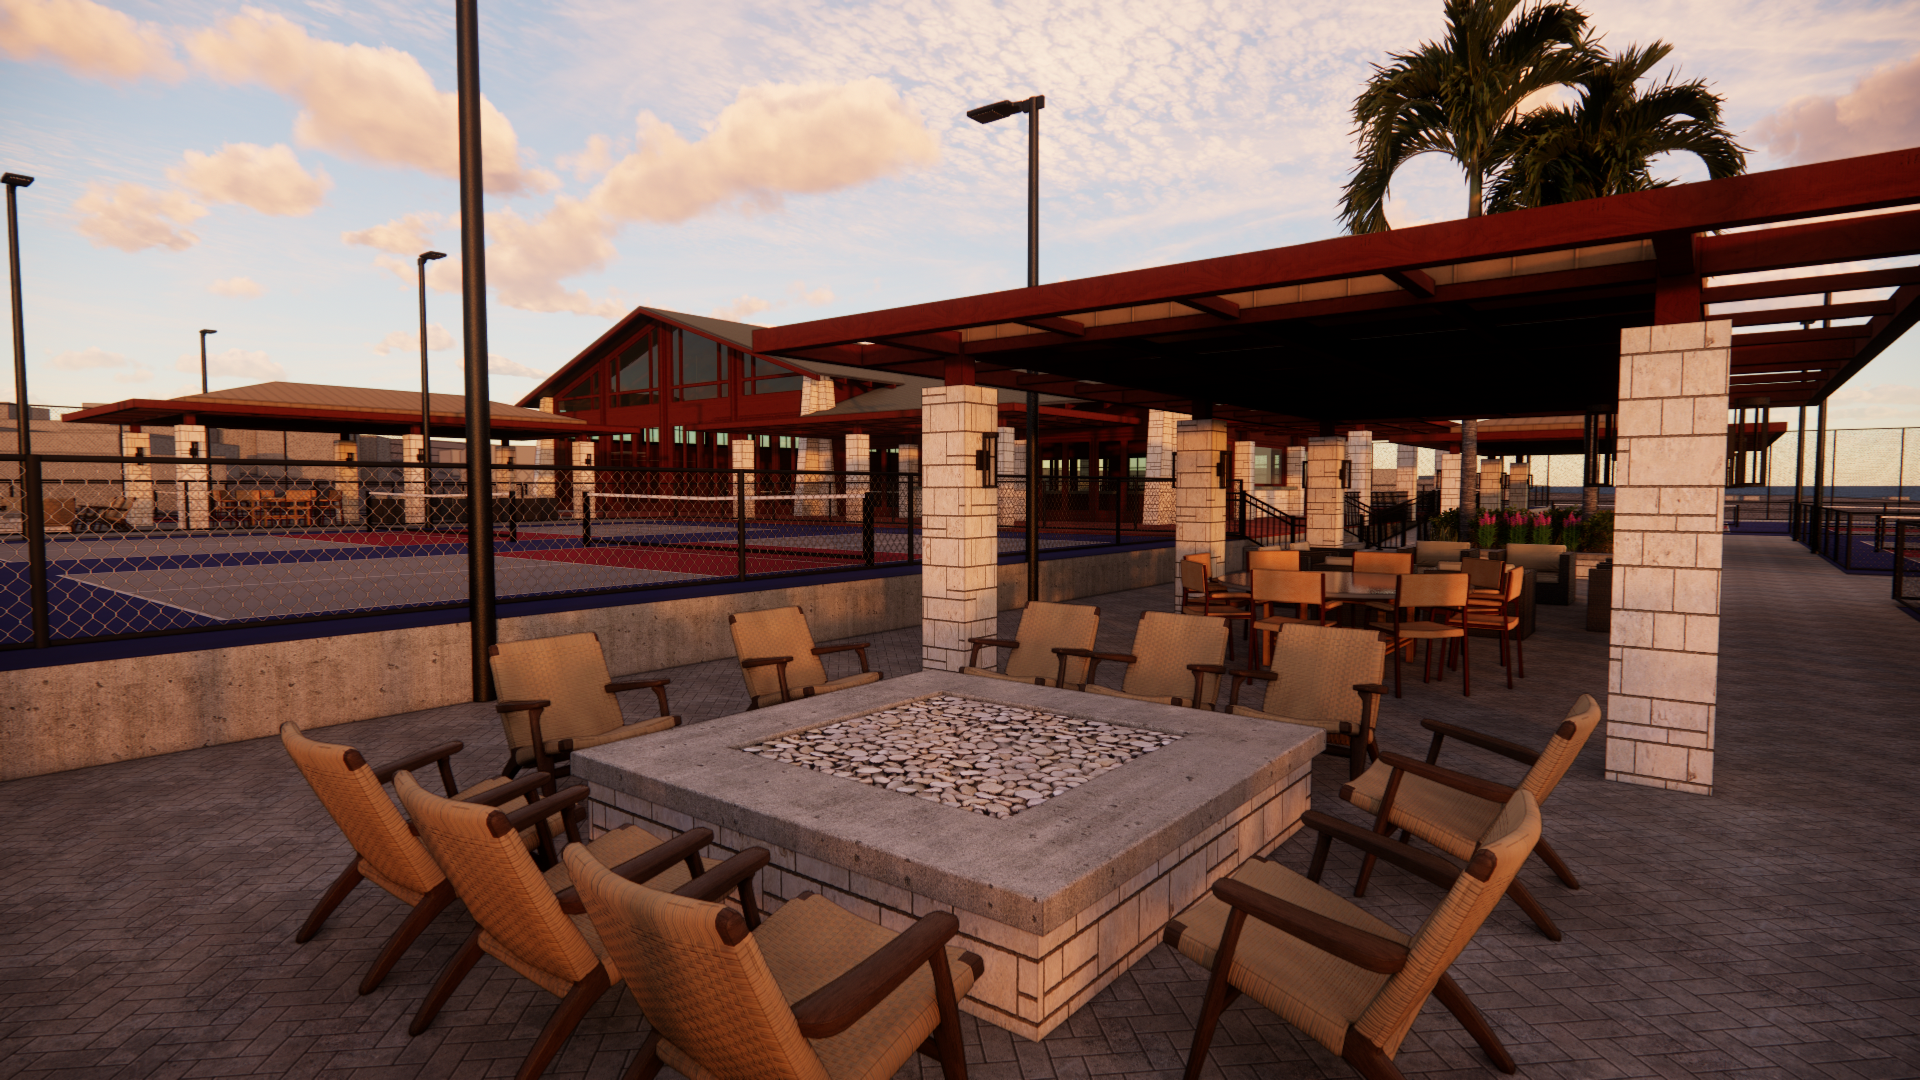 02 - Fire Pit to Event Center - Sunset.png